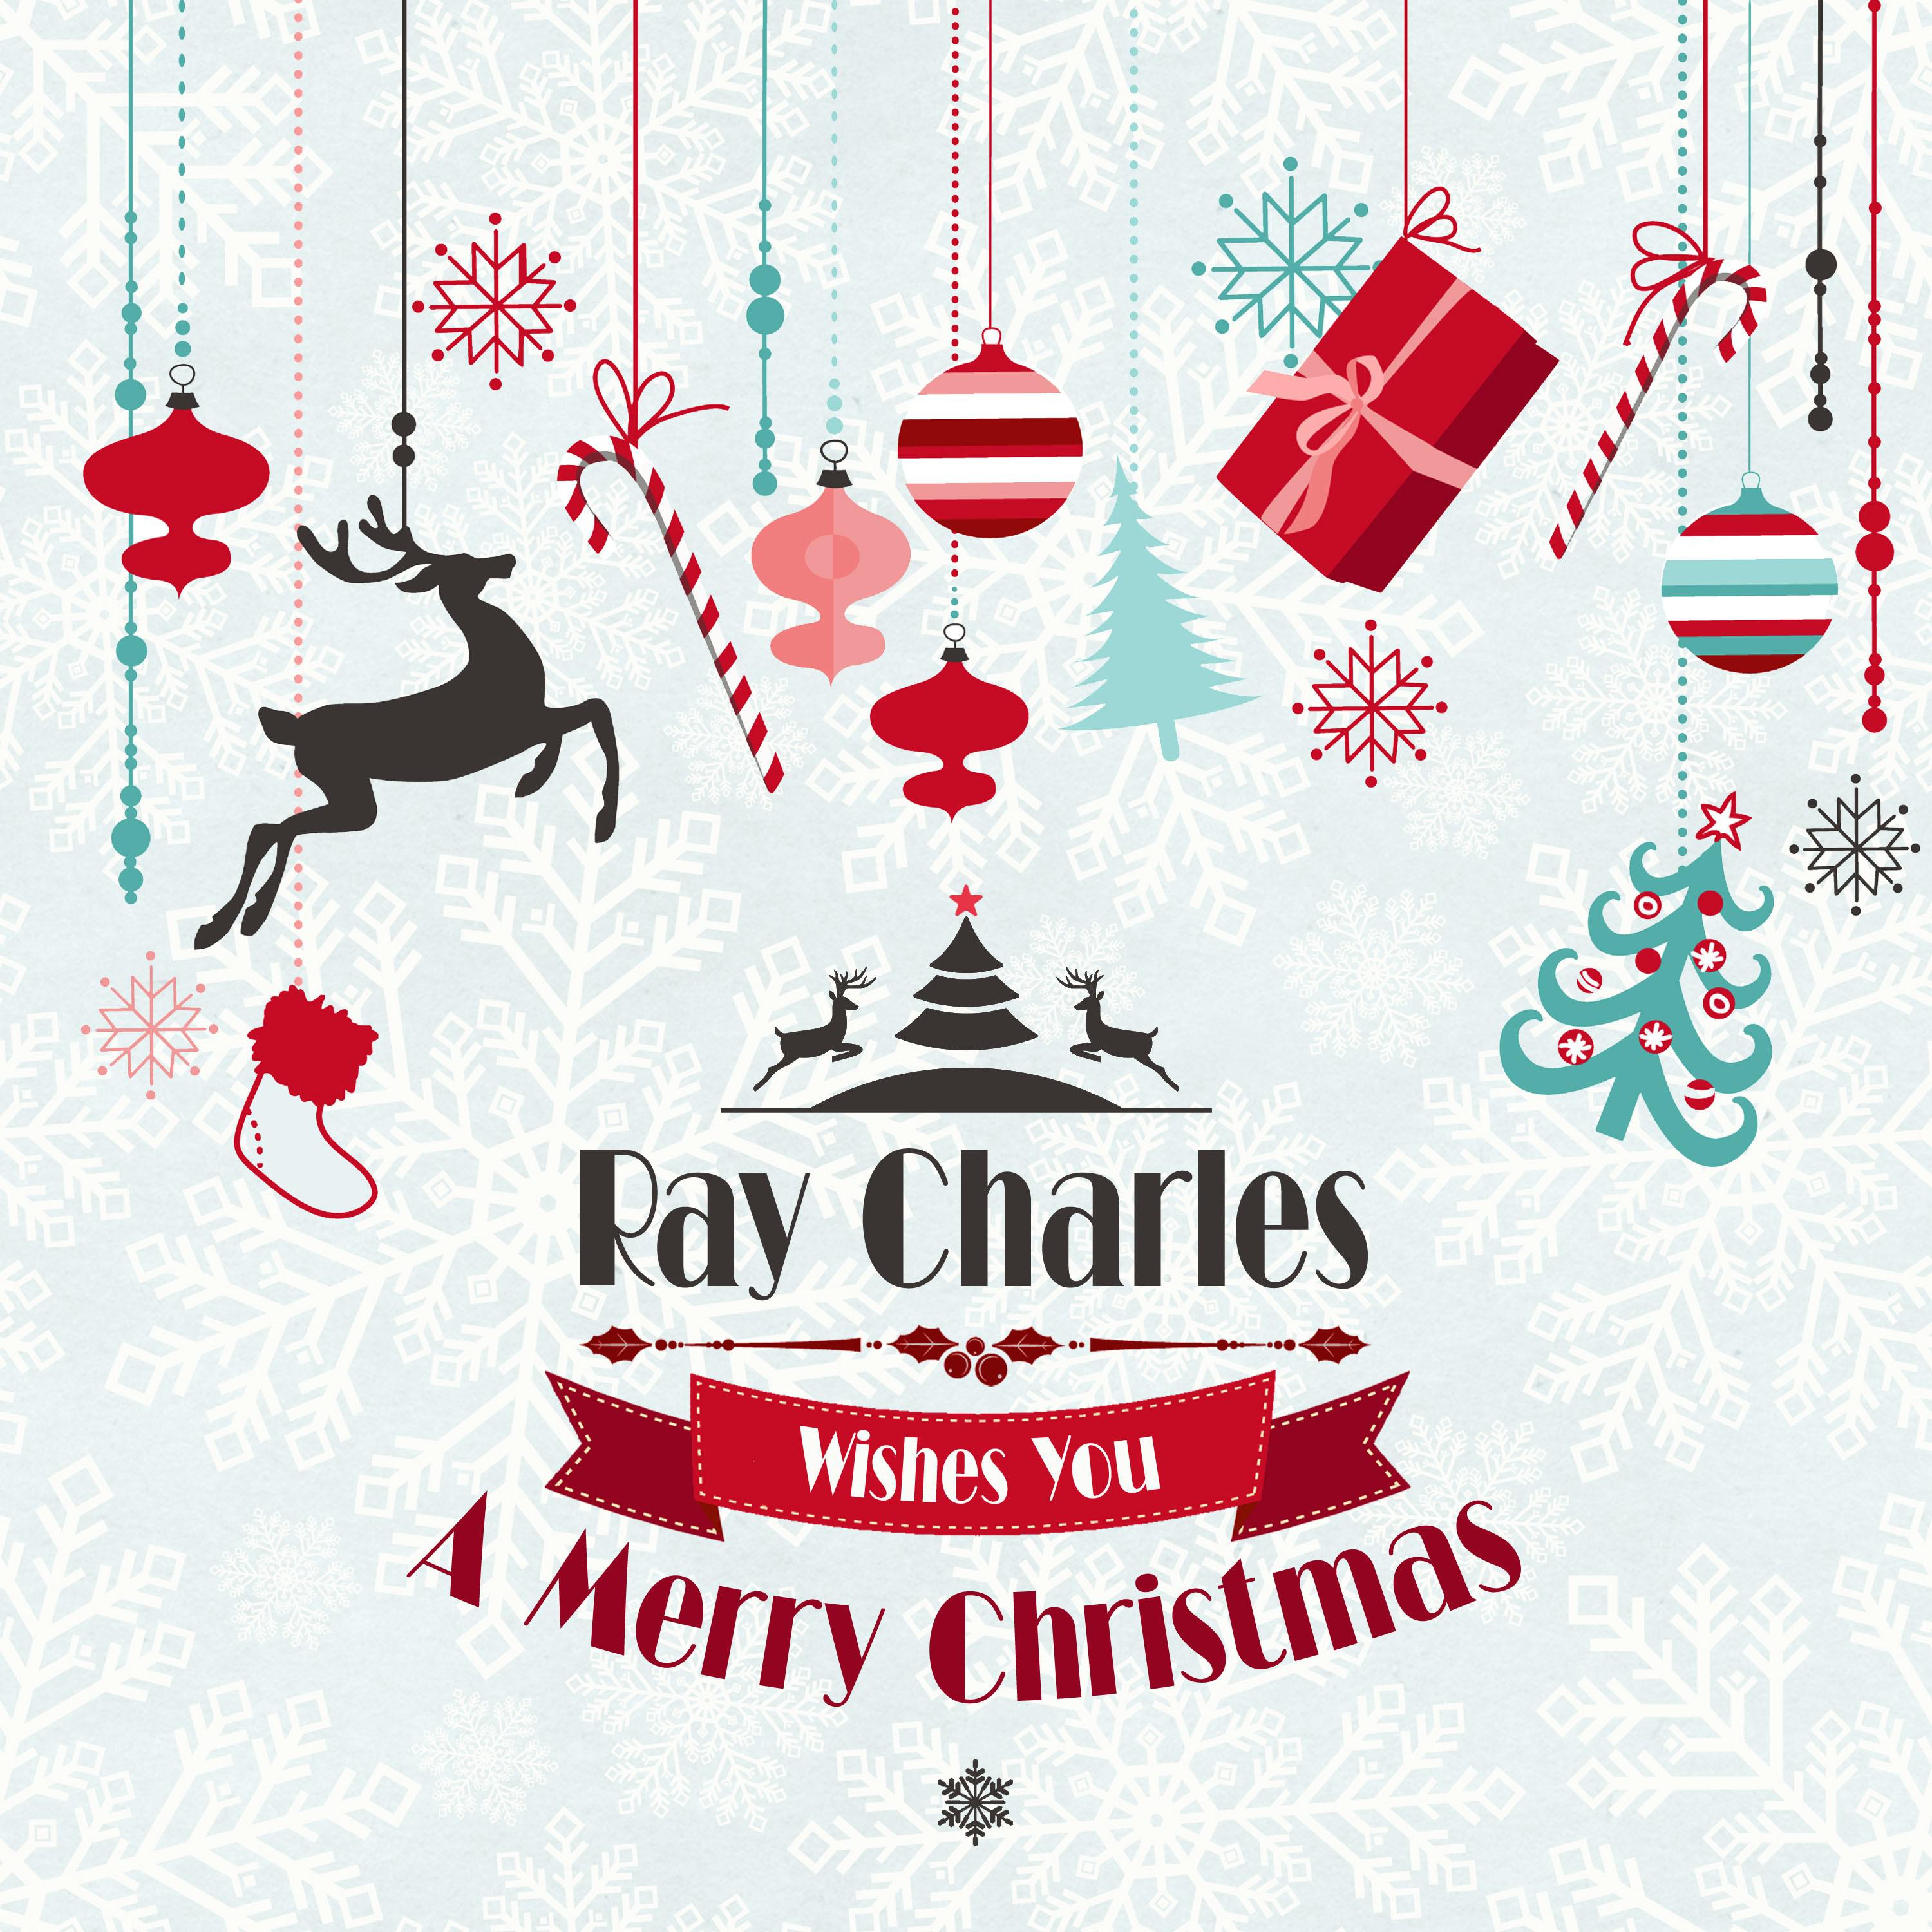 Ray Charles Wishes You a Merry Christmas专辑